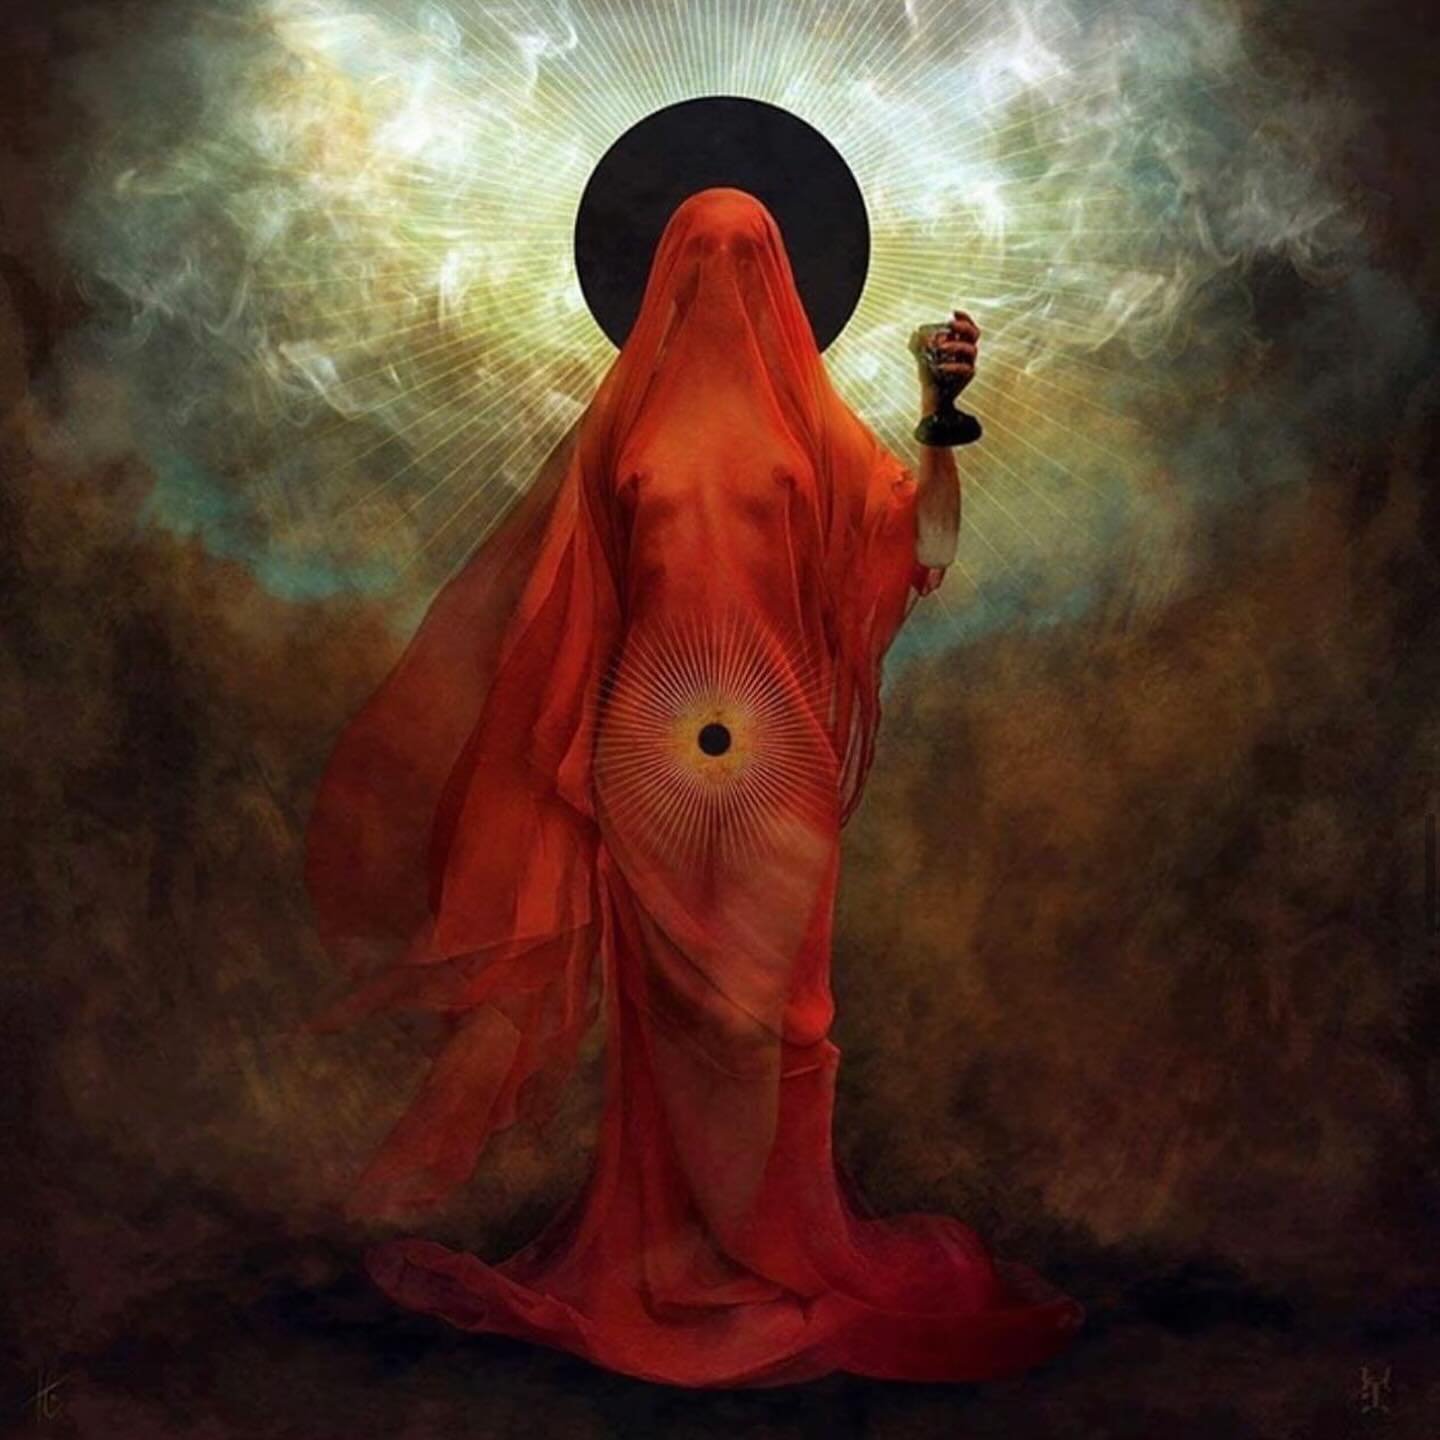 🥀⭐️🖤 VENUSIAN UNDERWORLD 🖤⭐️🥀 Our Lady of Love, Venus, moves into Taurus today, a zodiac sign that she rules, and departs from our Earthly view with her heliacal set beyond the horizon line (subject to latitude &amp; altitude). 

Her energy that 